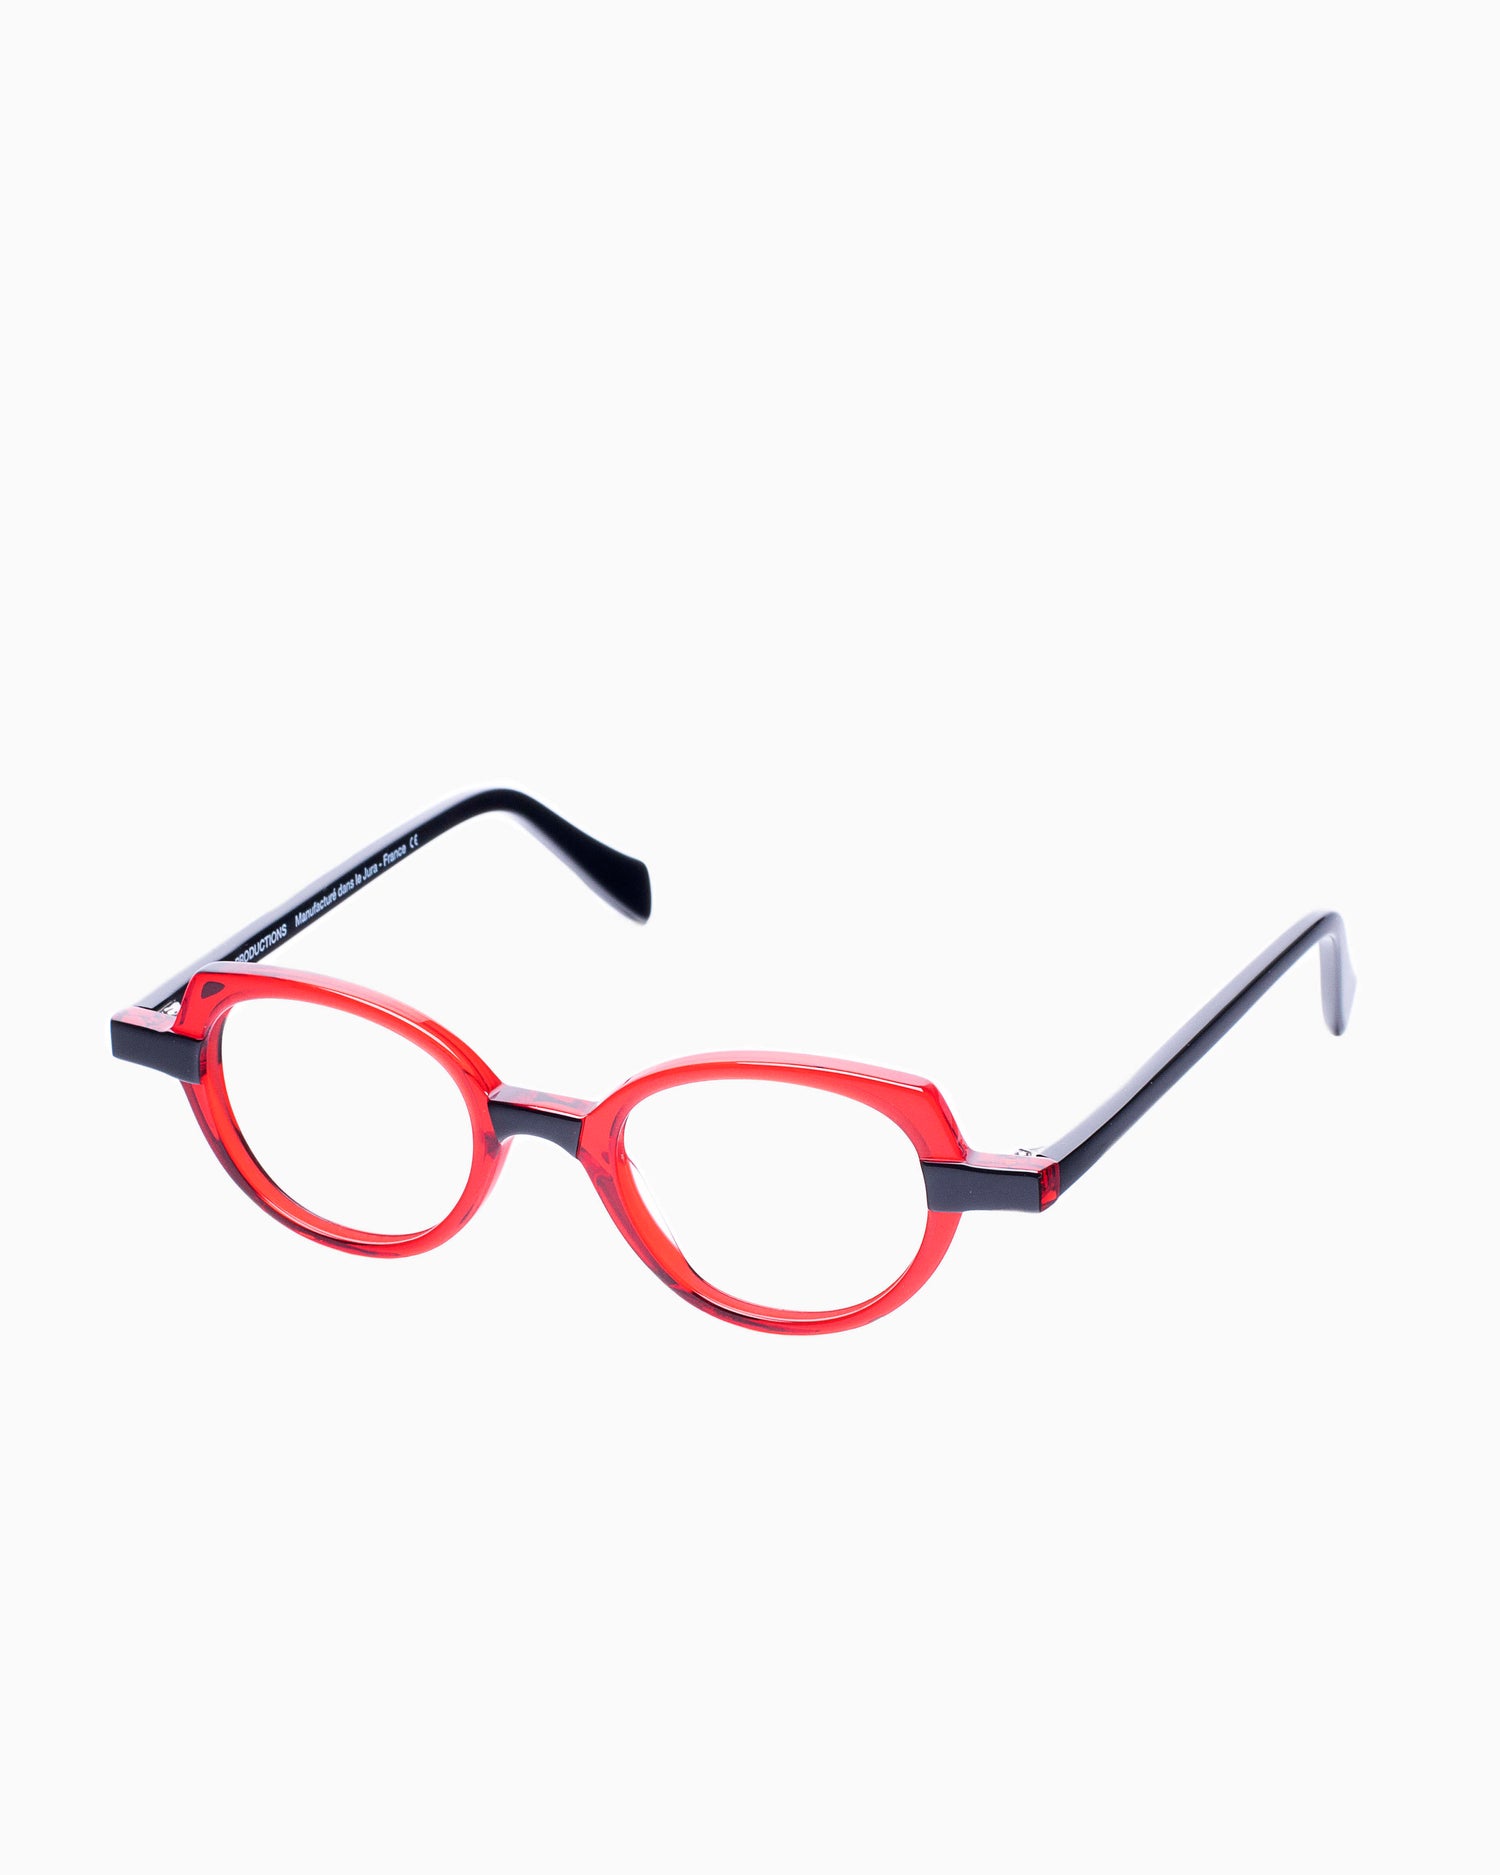 TRACTION - Ovid - Noirou | glasses bar:  Marie-Sophie Dion